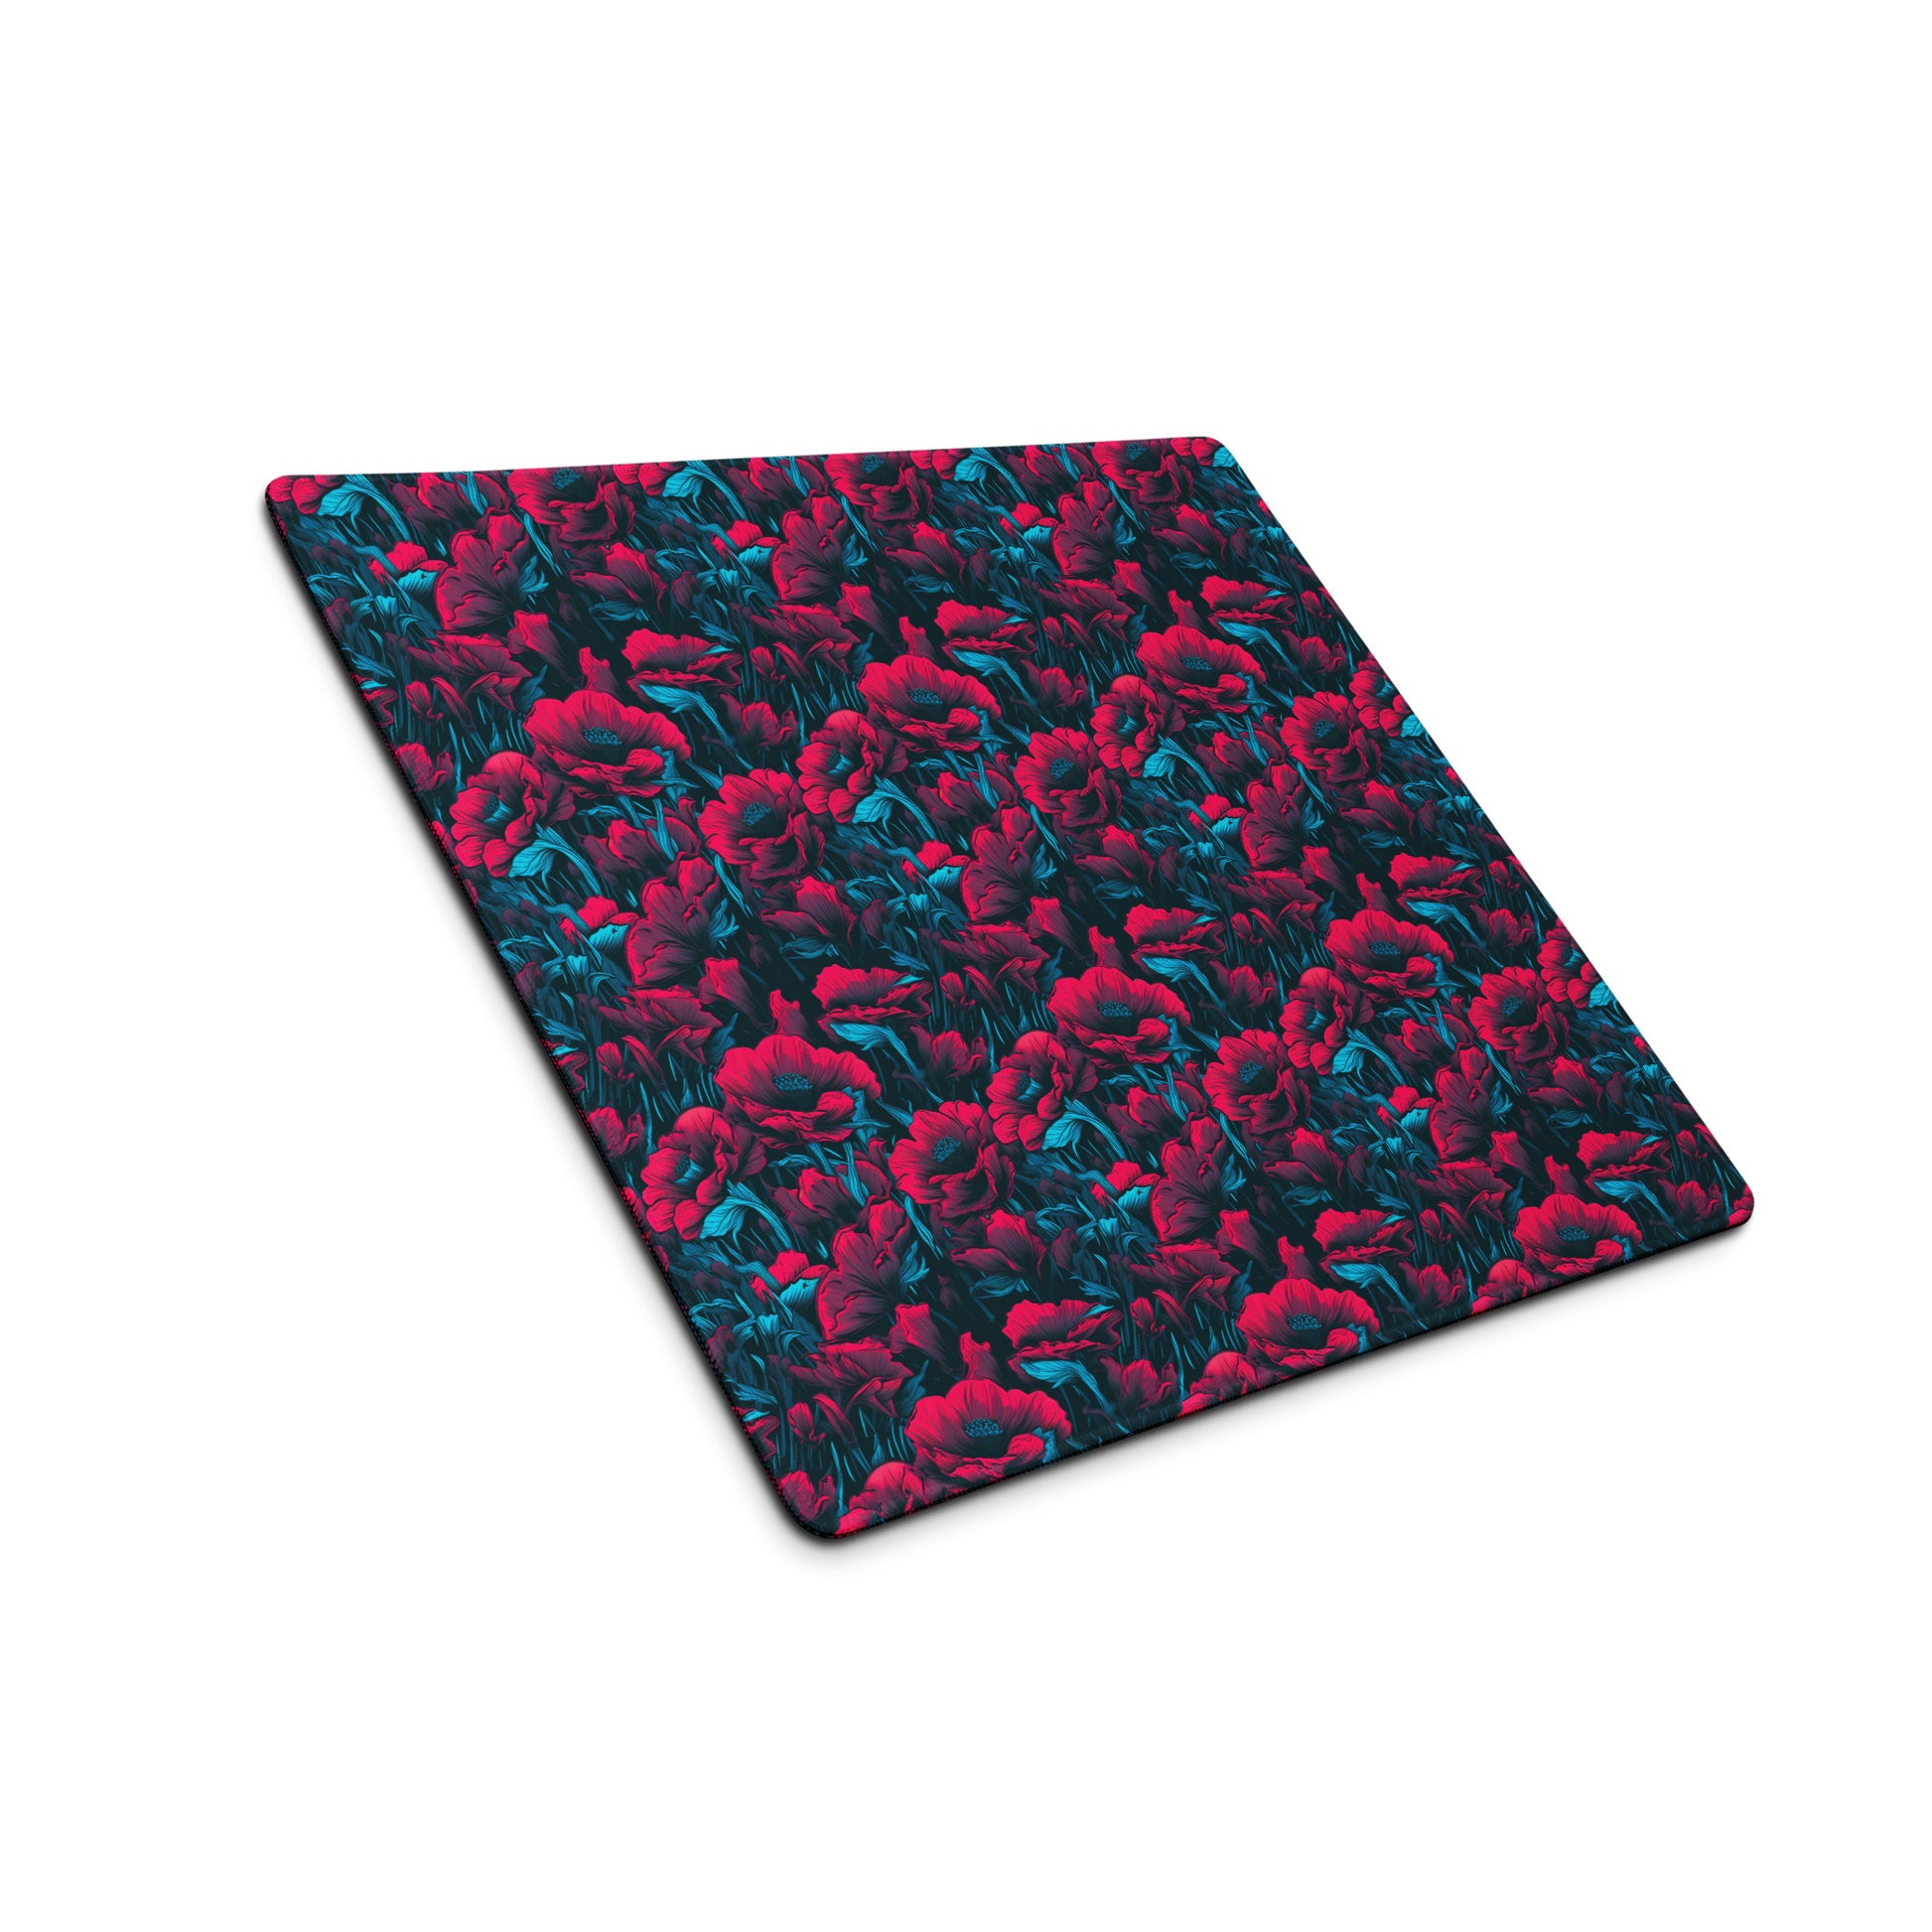 A 18" x 16" desk pad with a red and blue floral pattern sitting at an angle.